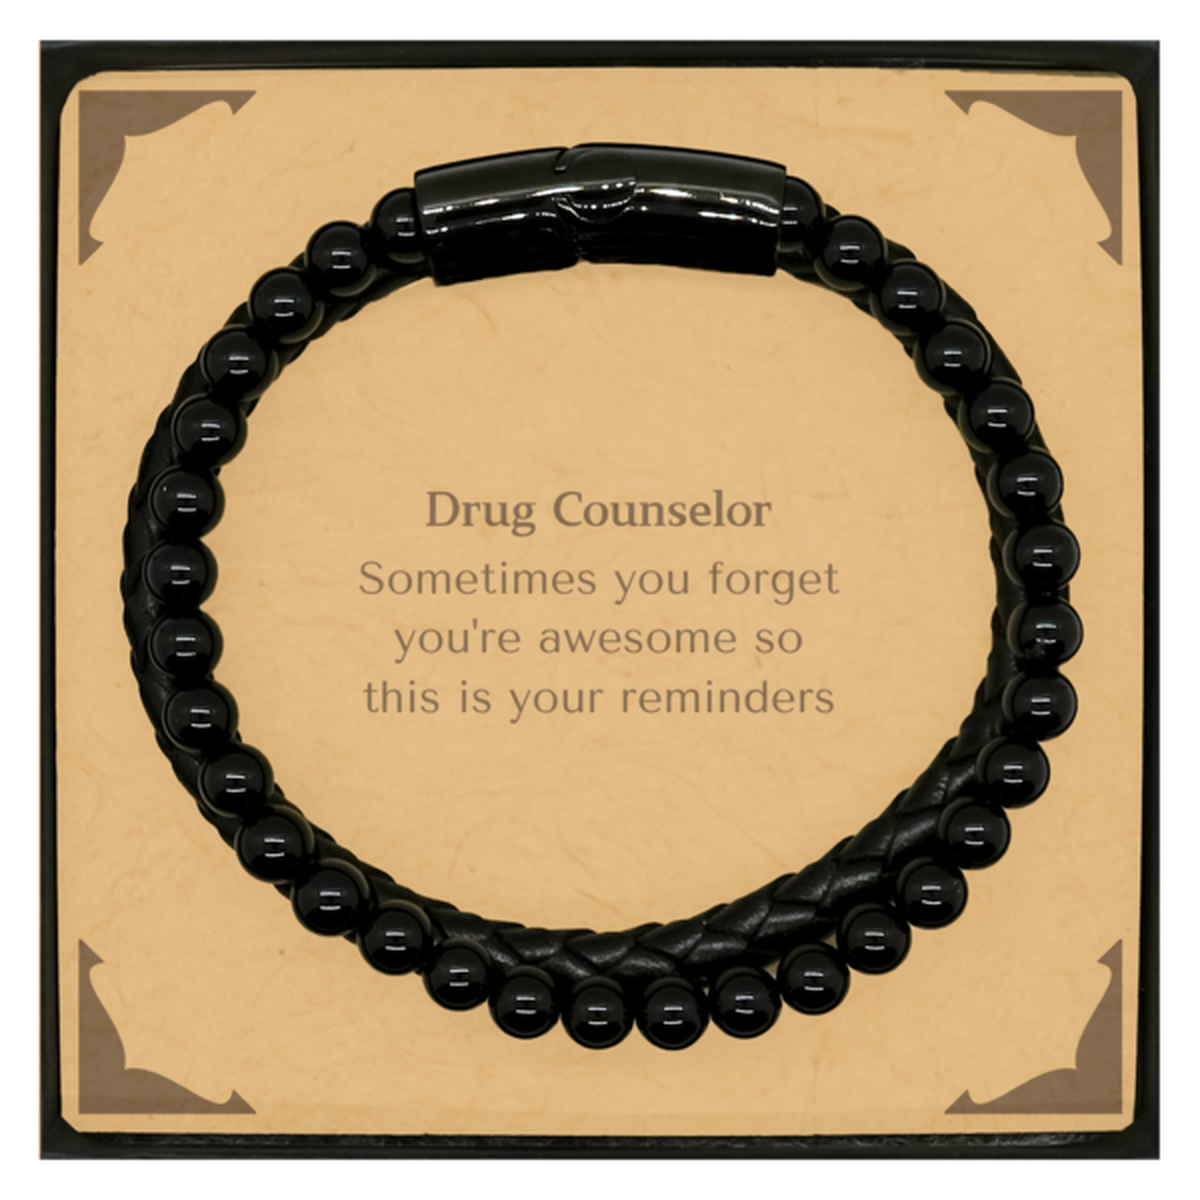 Sentimental Drug Counselor Stone Leather Bracelets, Drug Counselor Sometimes you forget you're awesome so this is your reminders, Graduation Christmas Birthday Gifts for Drug Counselor, Men, Women, Coworkers